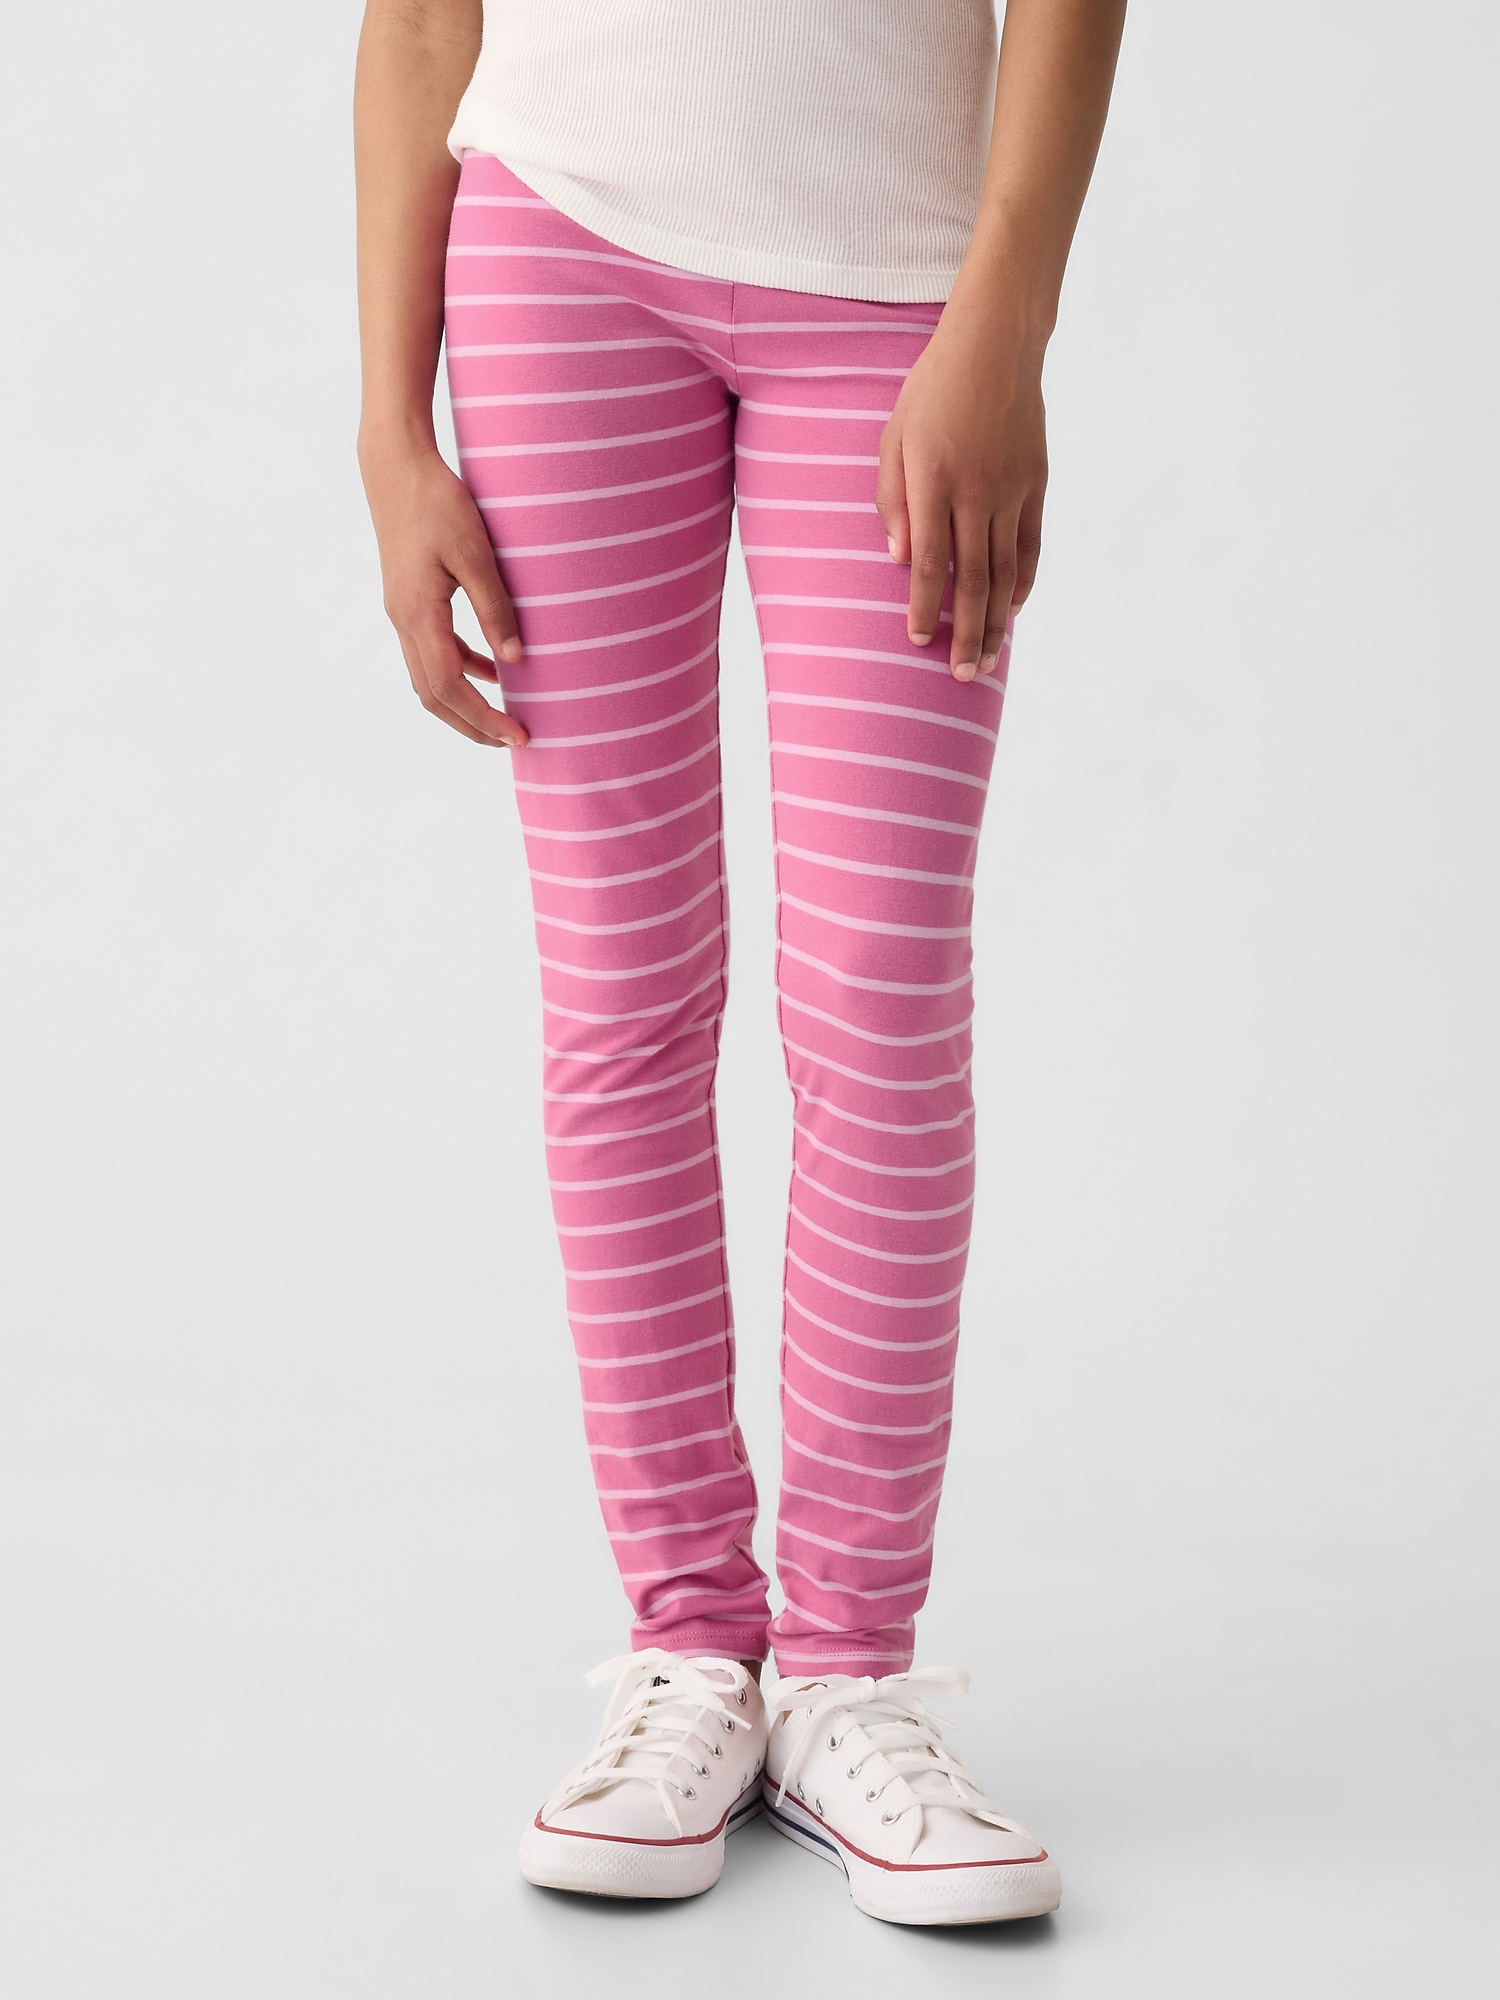 Striped tights for kids Pink light pink -  